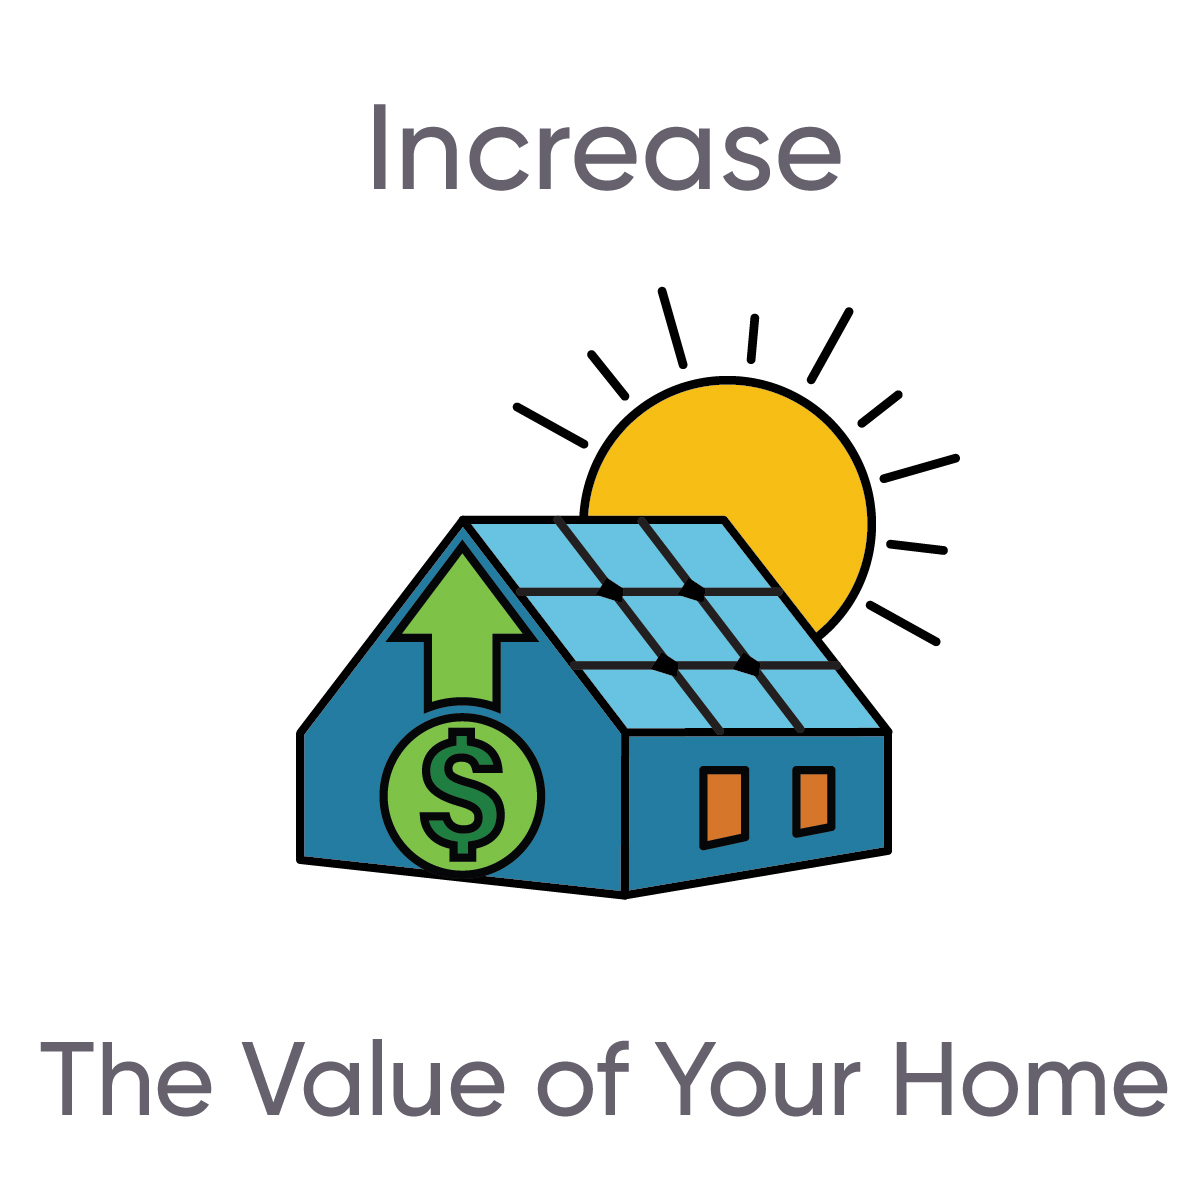 Increase the value of your home